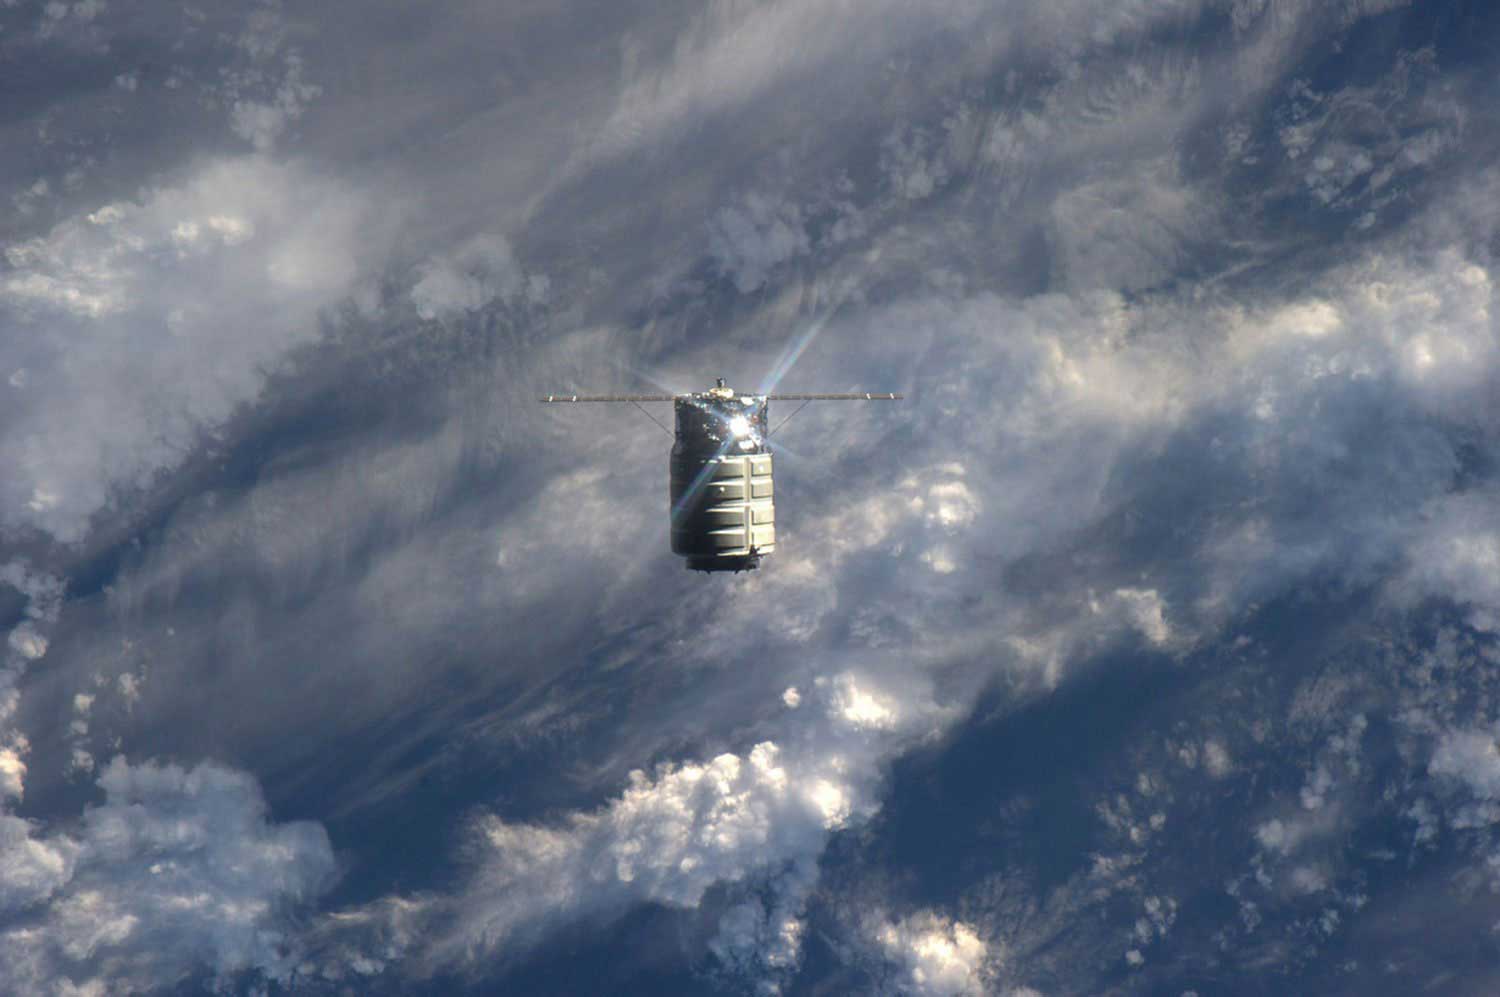 The unmanned U.S. commercial cargo ship Cygnus is seen approaching the International Space Station on Sept. 29, 2013. Cygnus flew itself to the International Space Station, completing the primary goal of its debut test flight before Station supply runs begin in December.